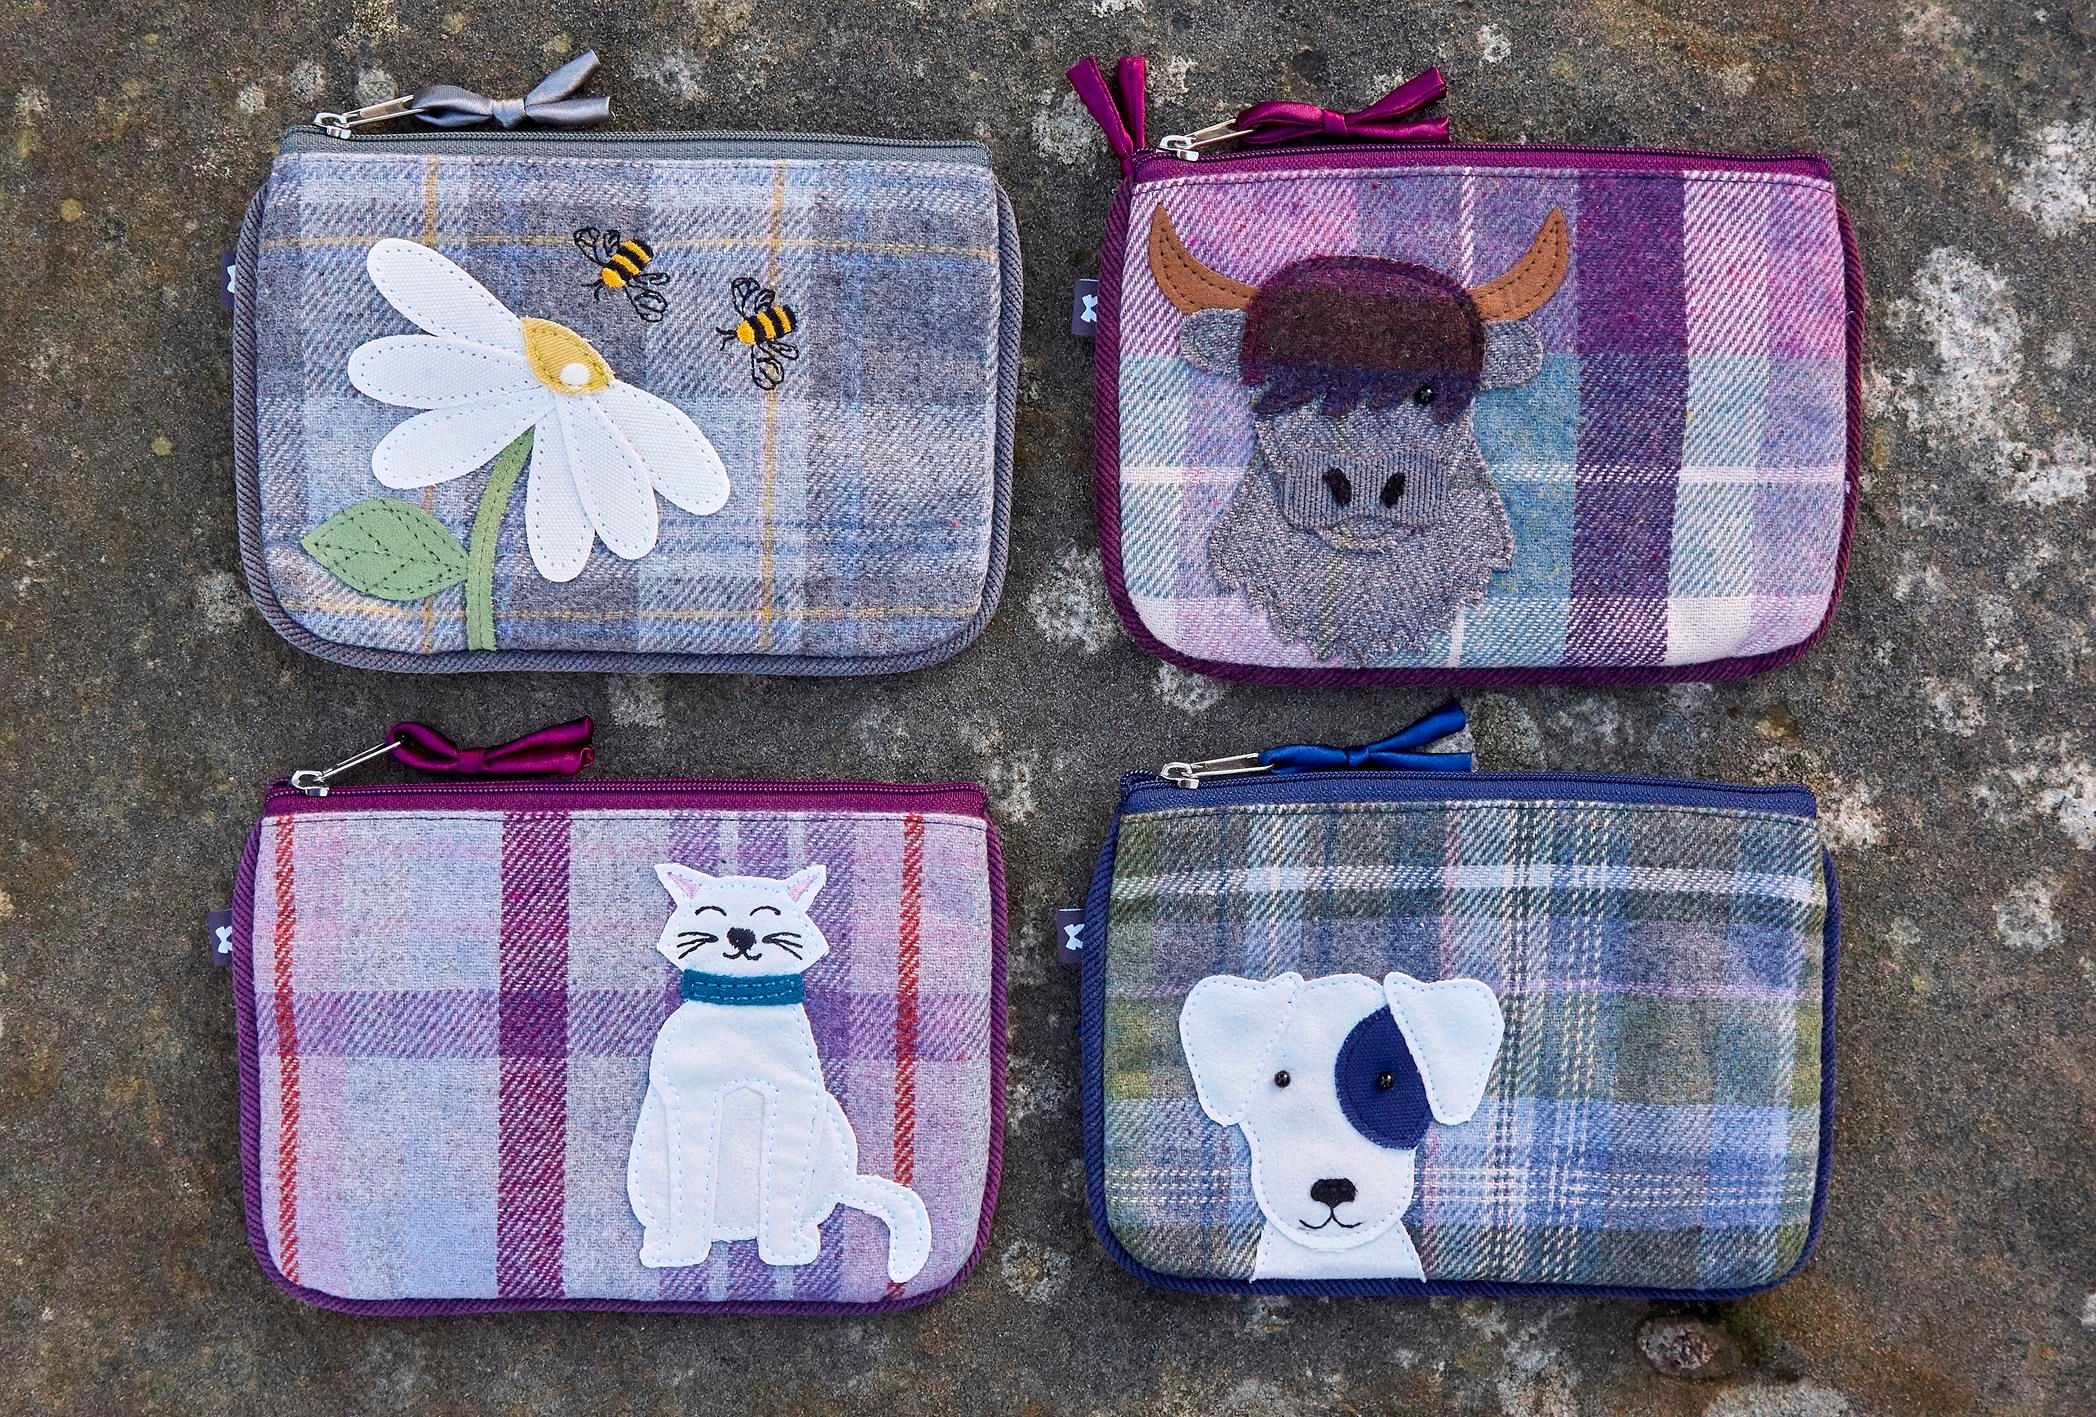 New Applique range from Earth Squared